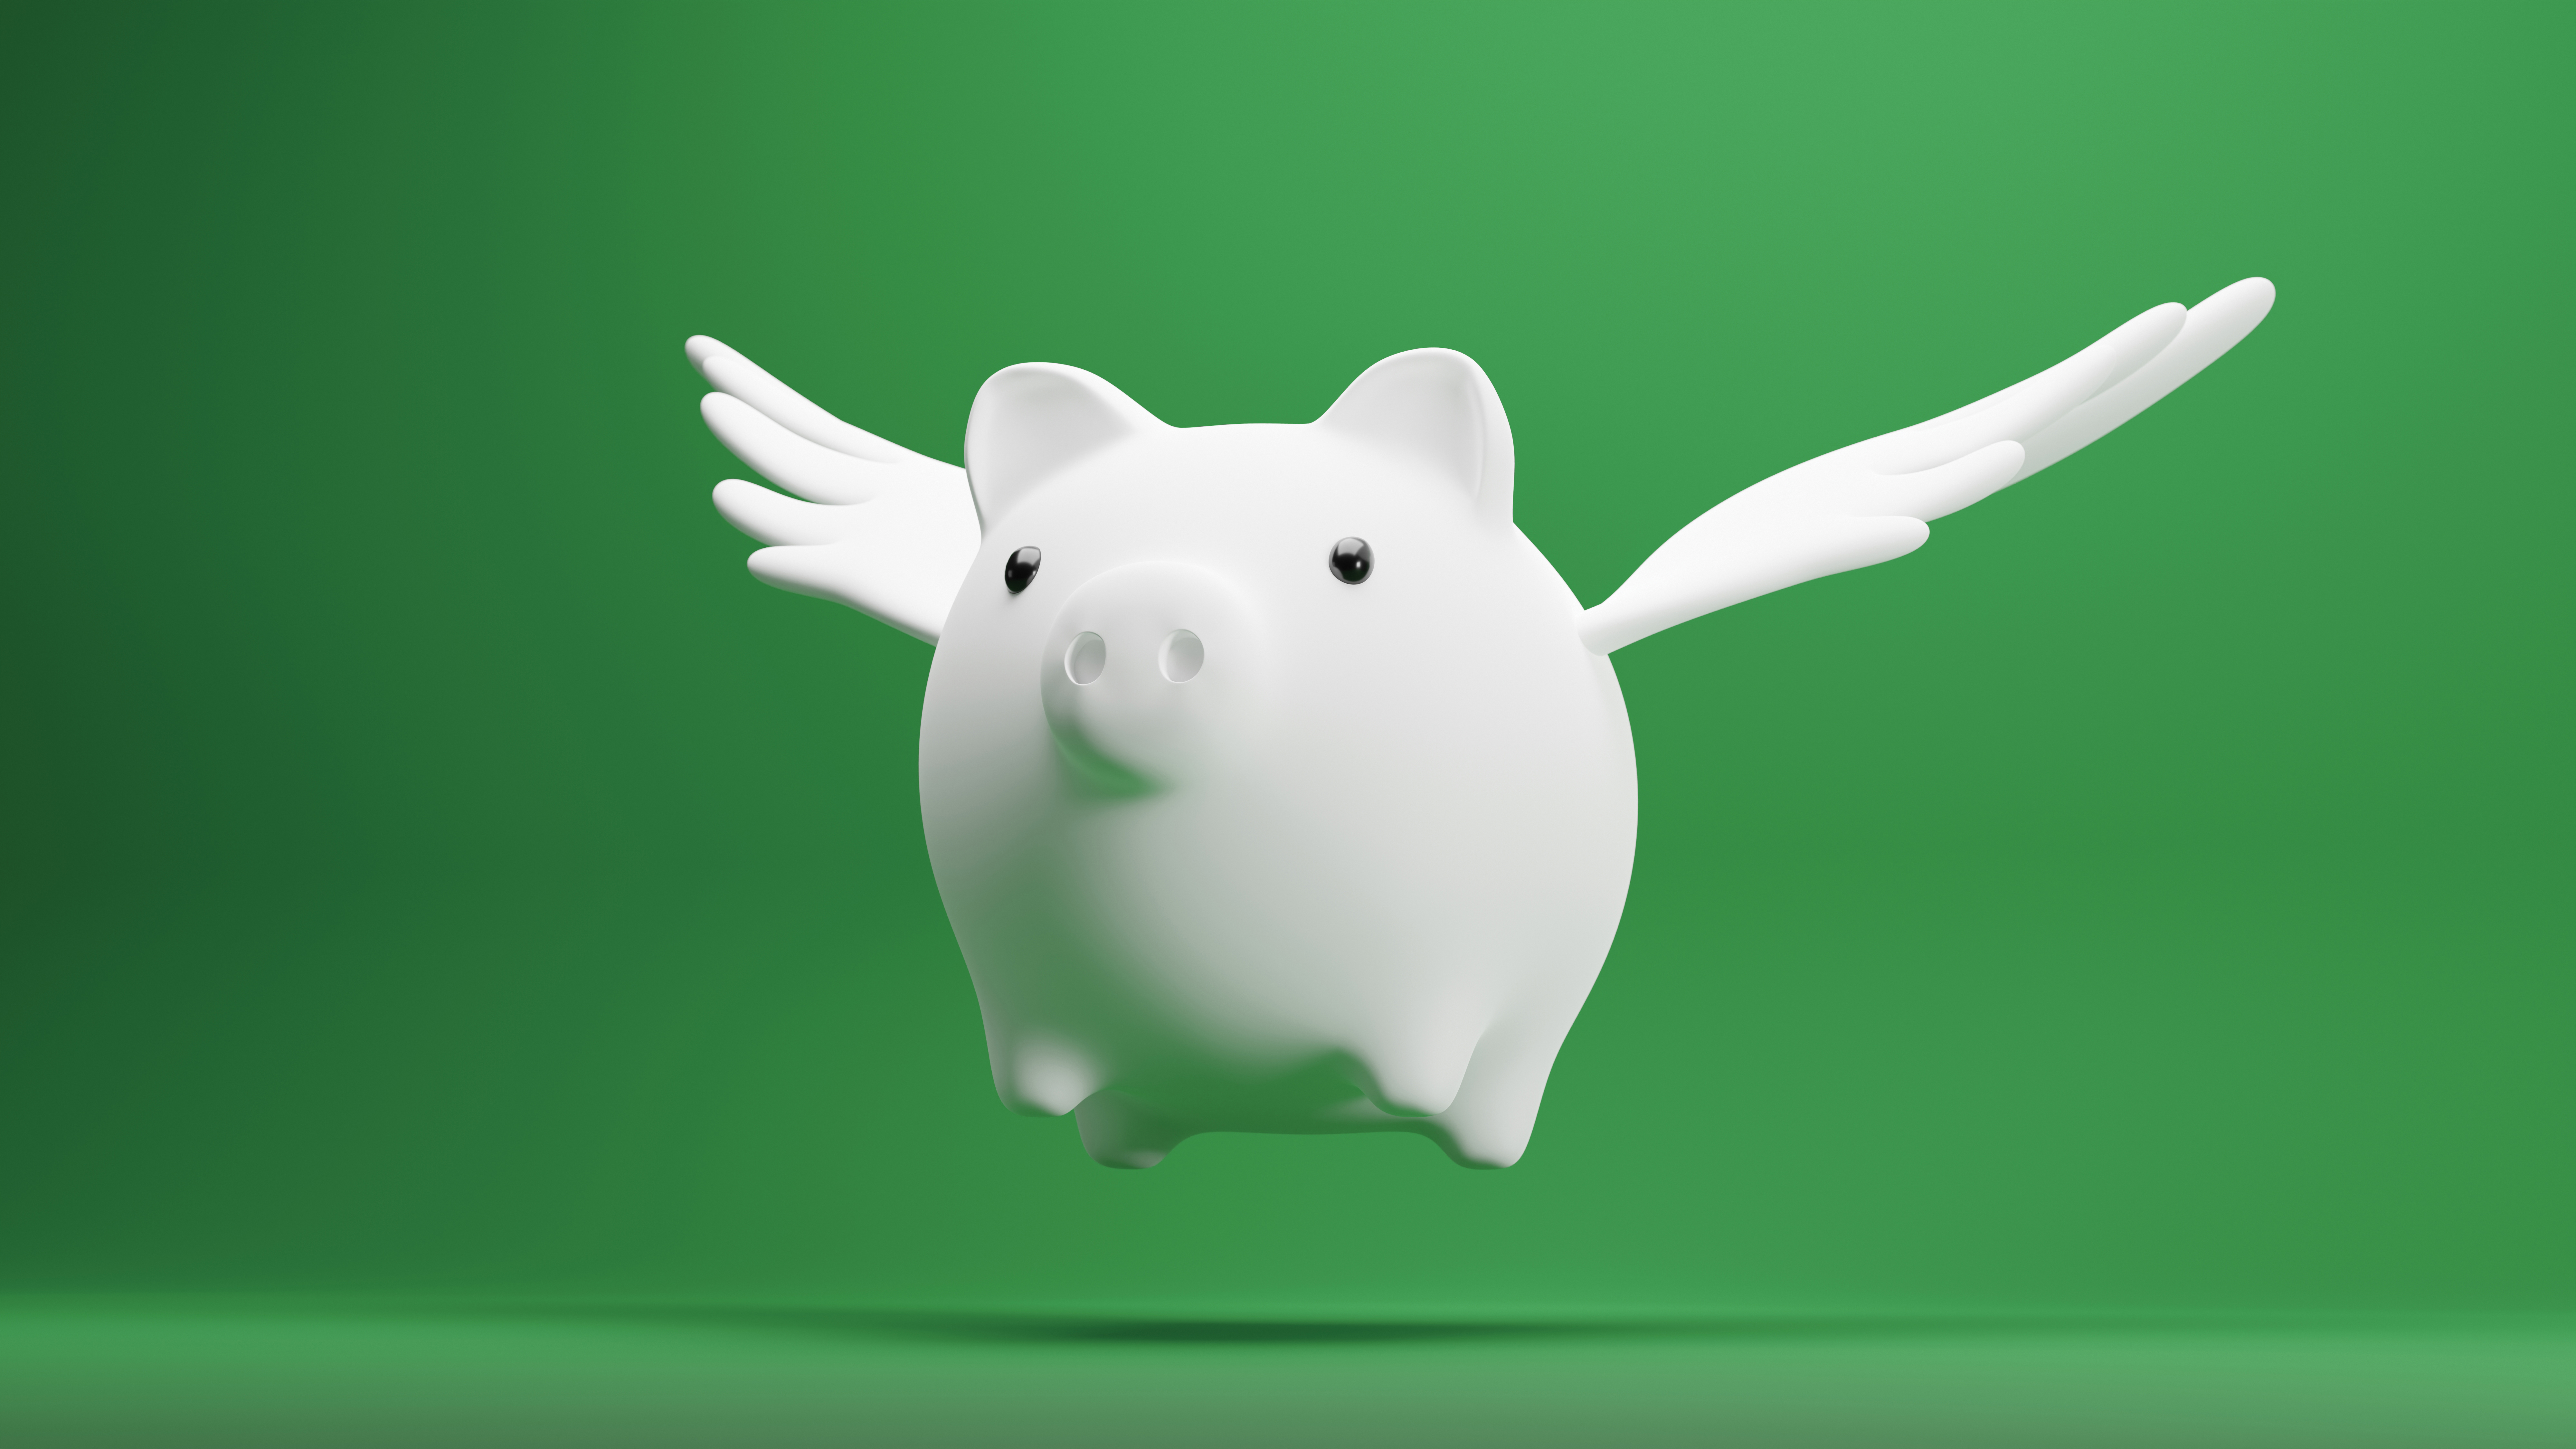 white piggy bank with wings on green background